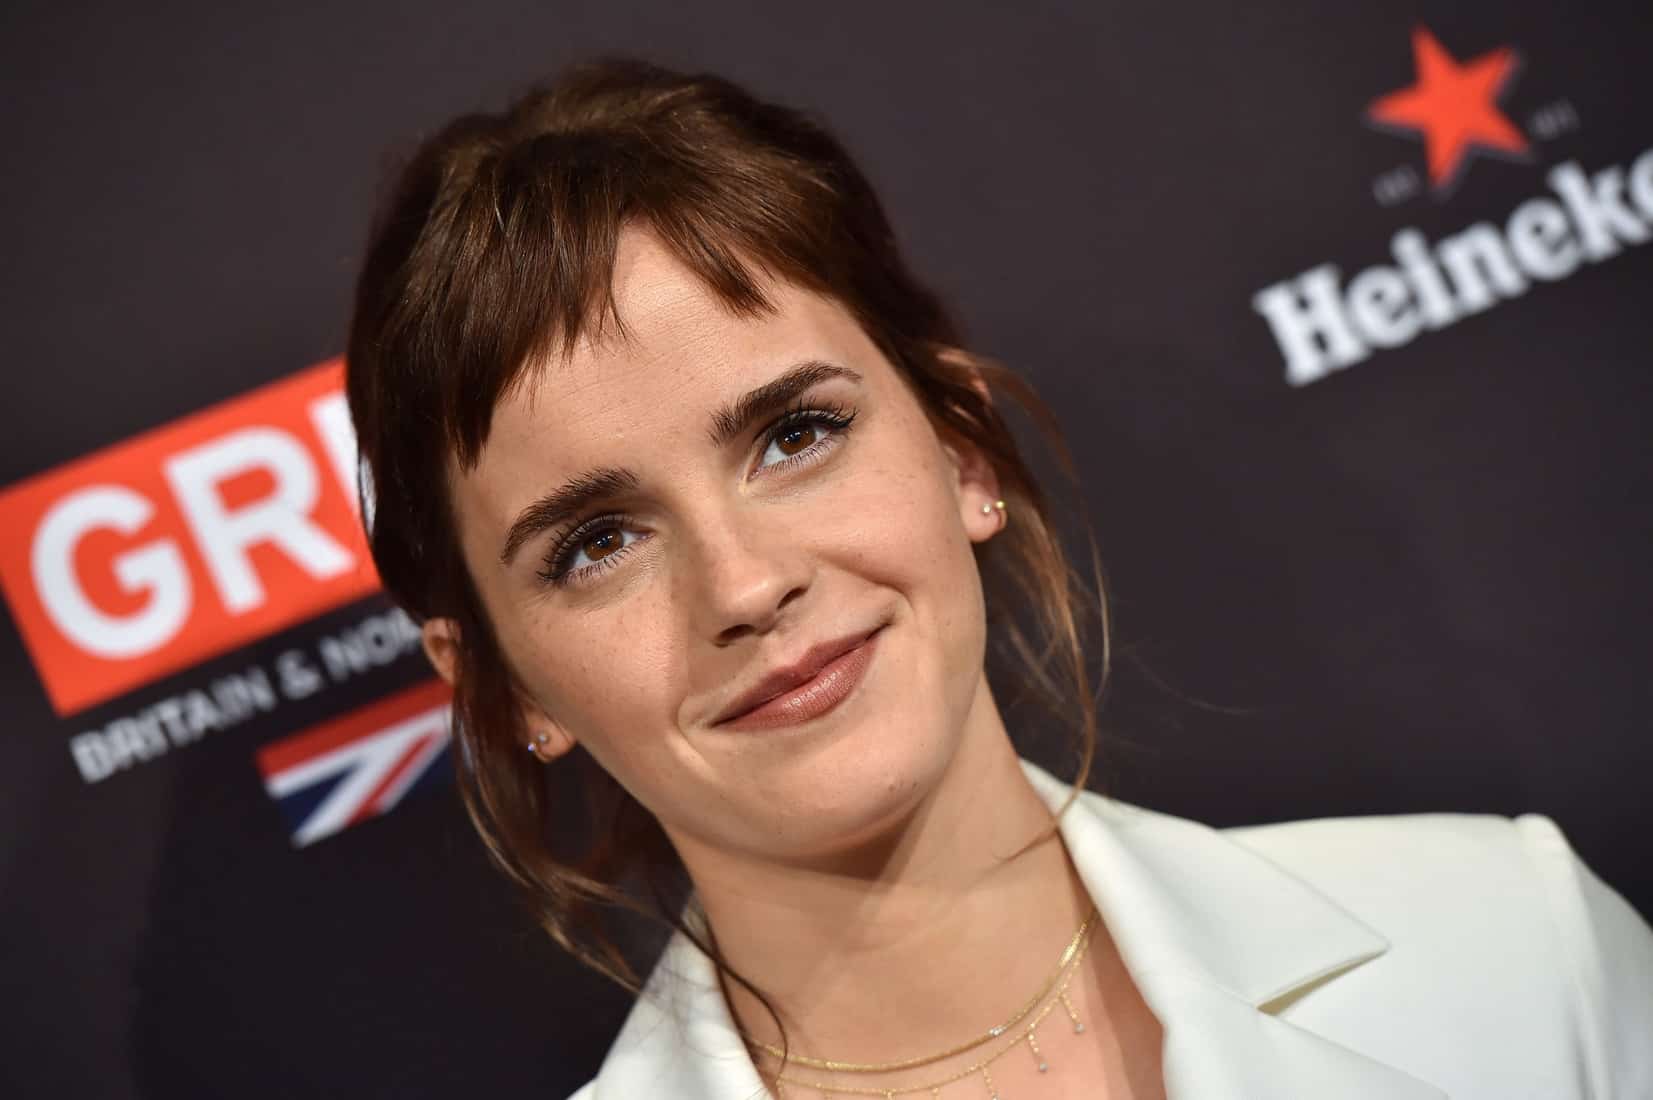 Emma Watson Wore a Glamorous Osman Suit at BAFTA Tea Party in Los Angeles